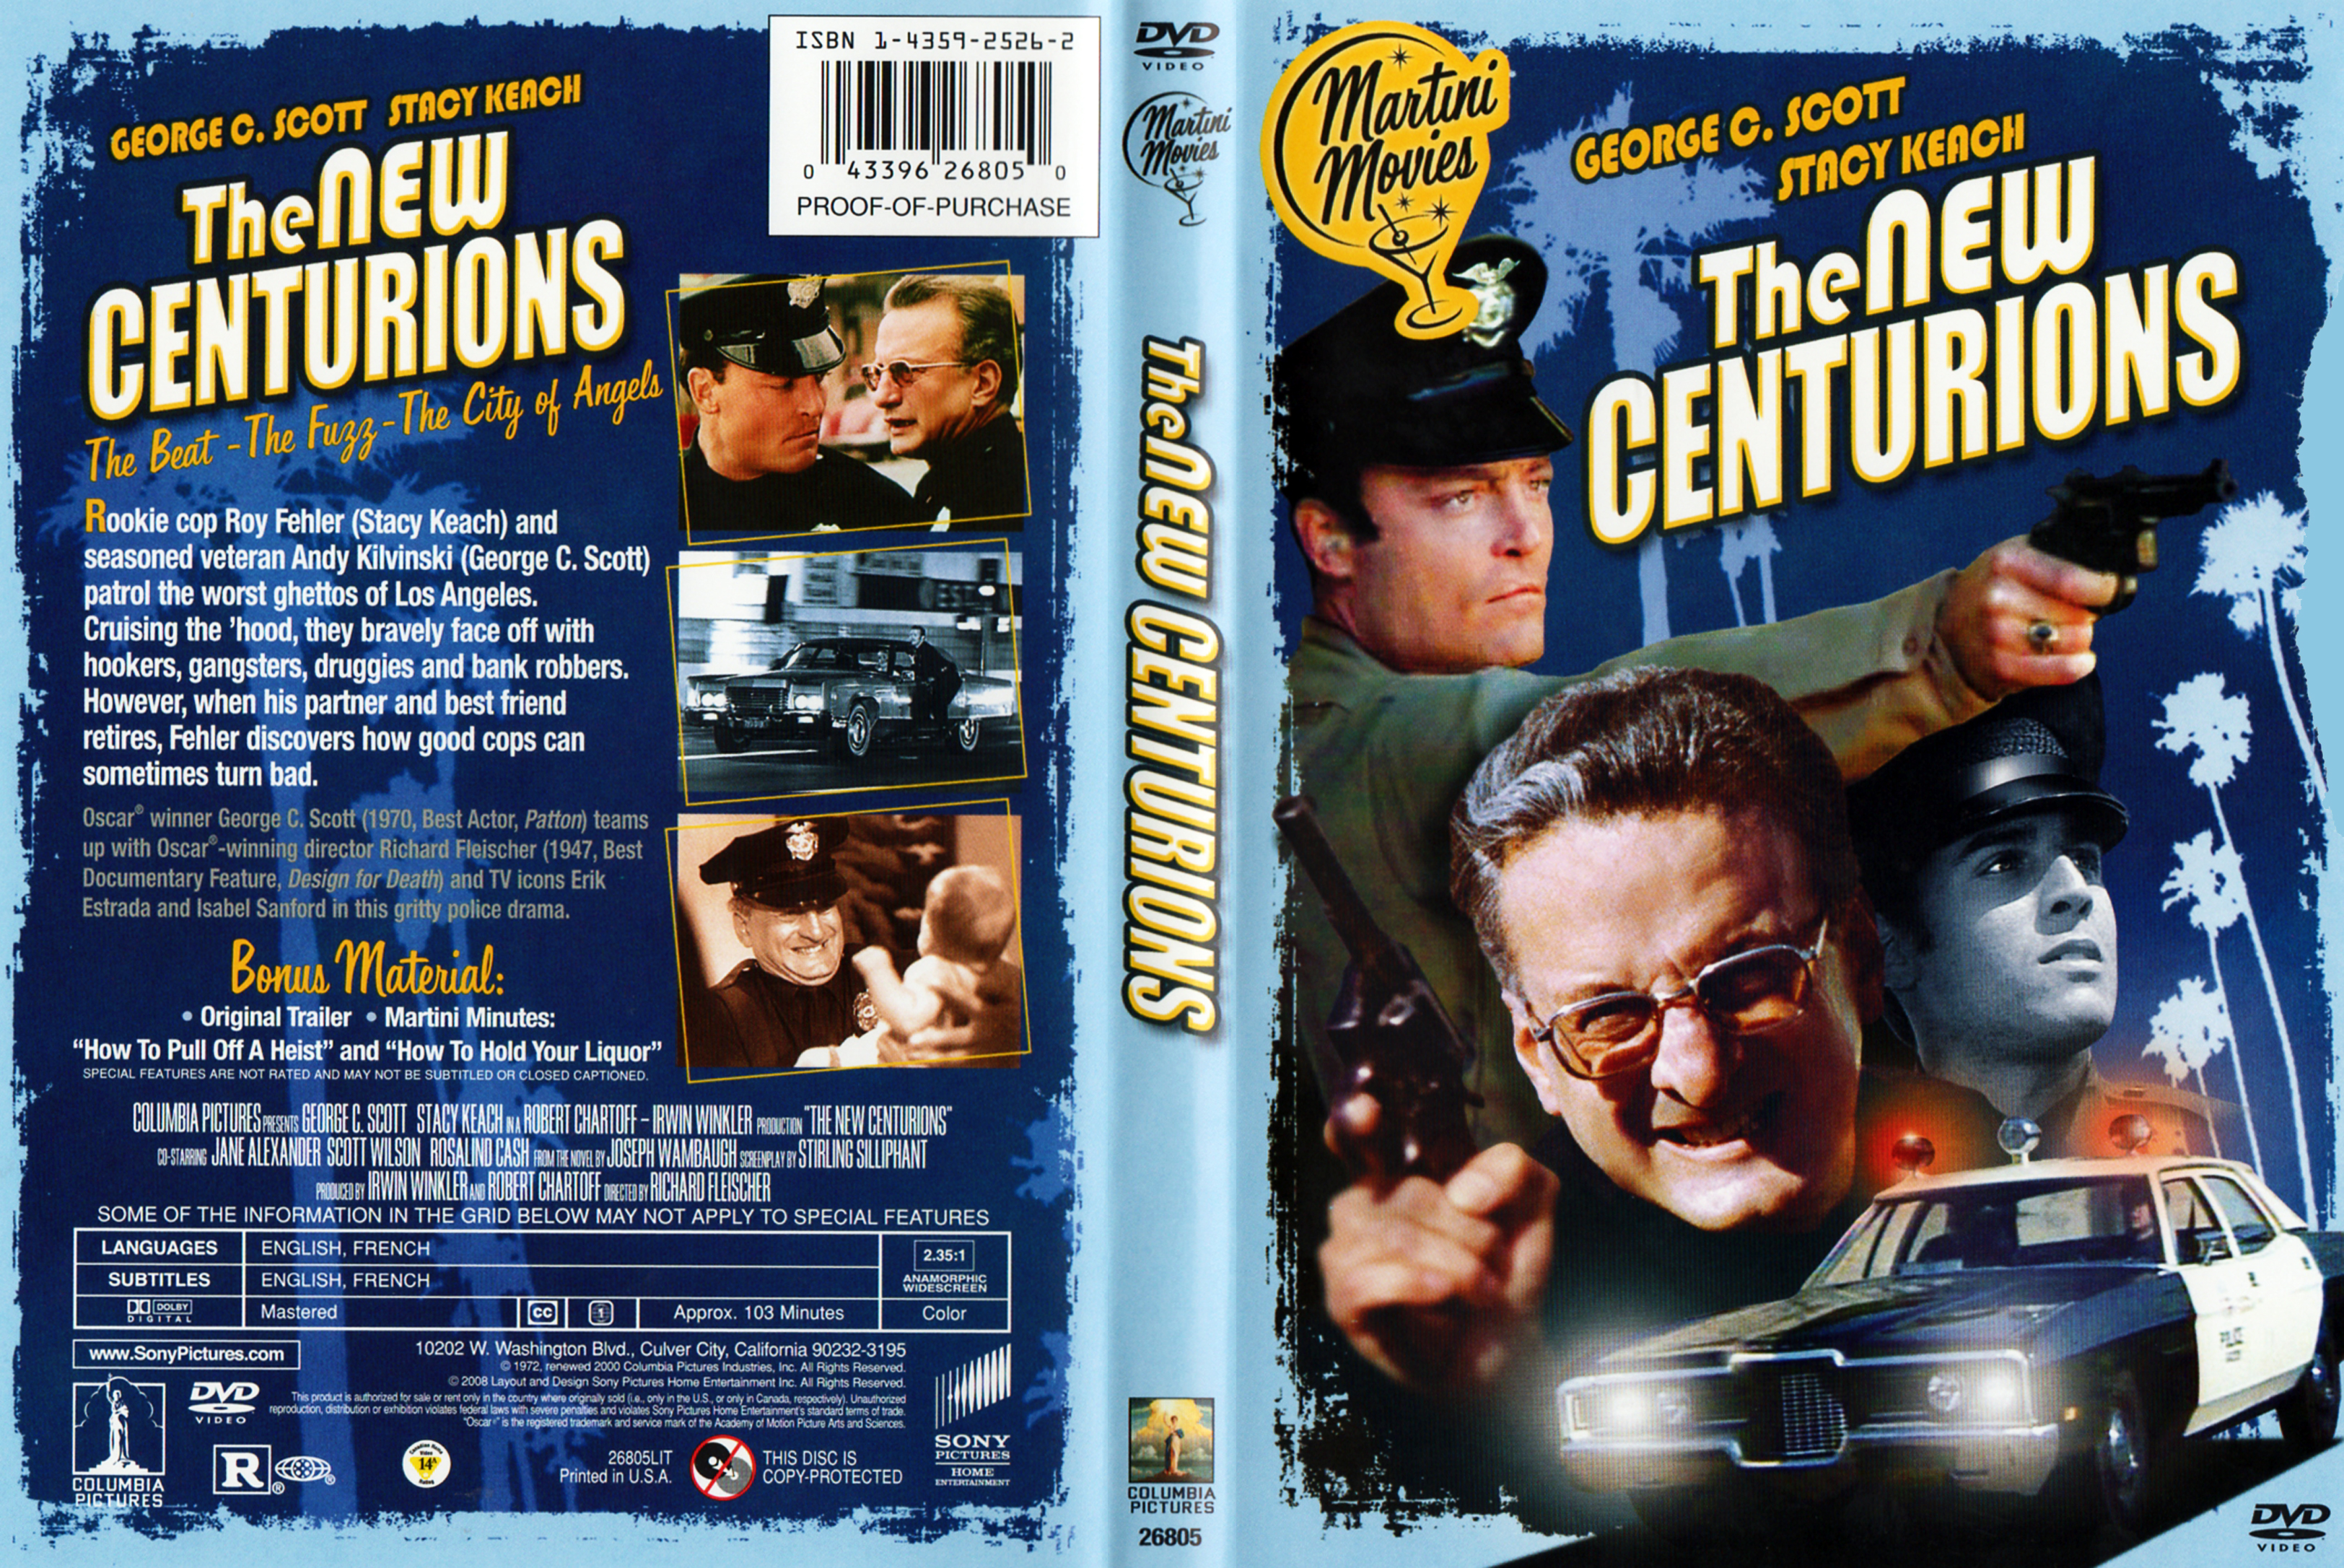 Jaquette DVD The new centurions Zone 1